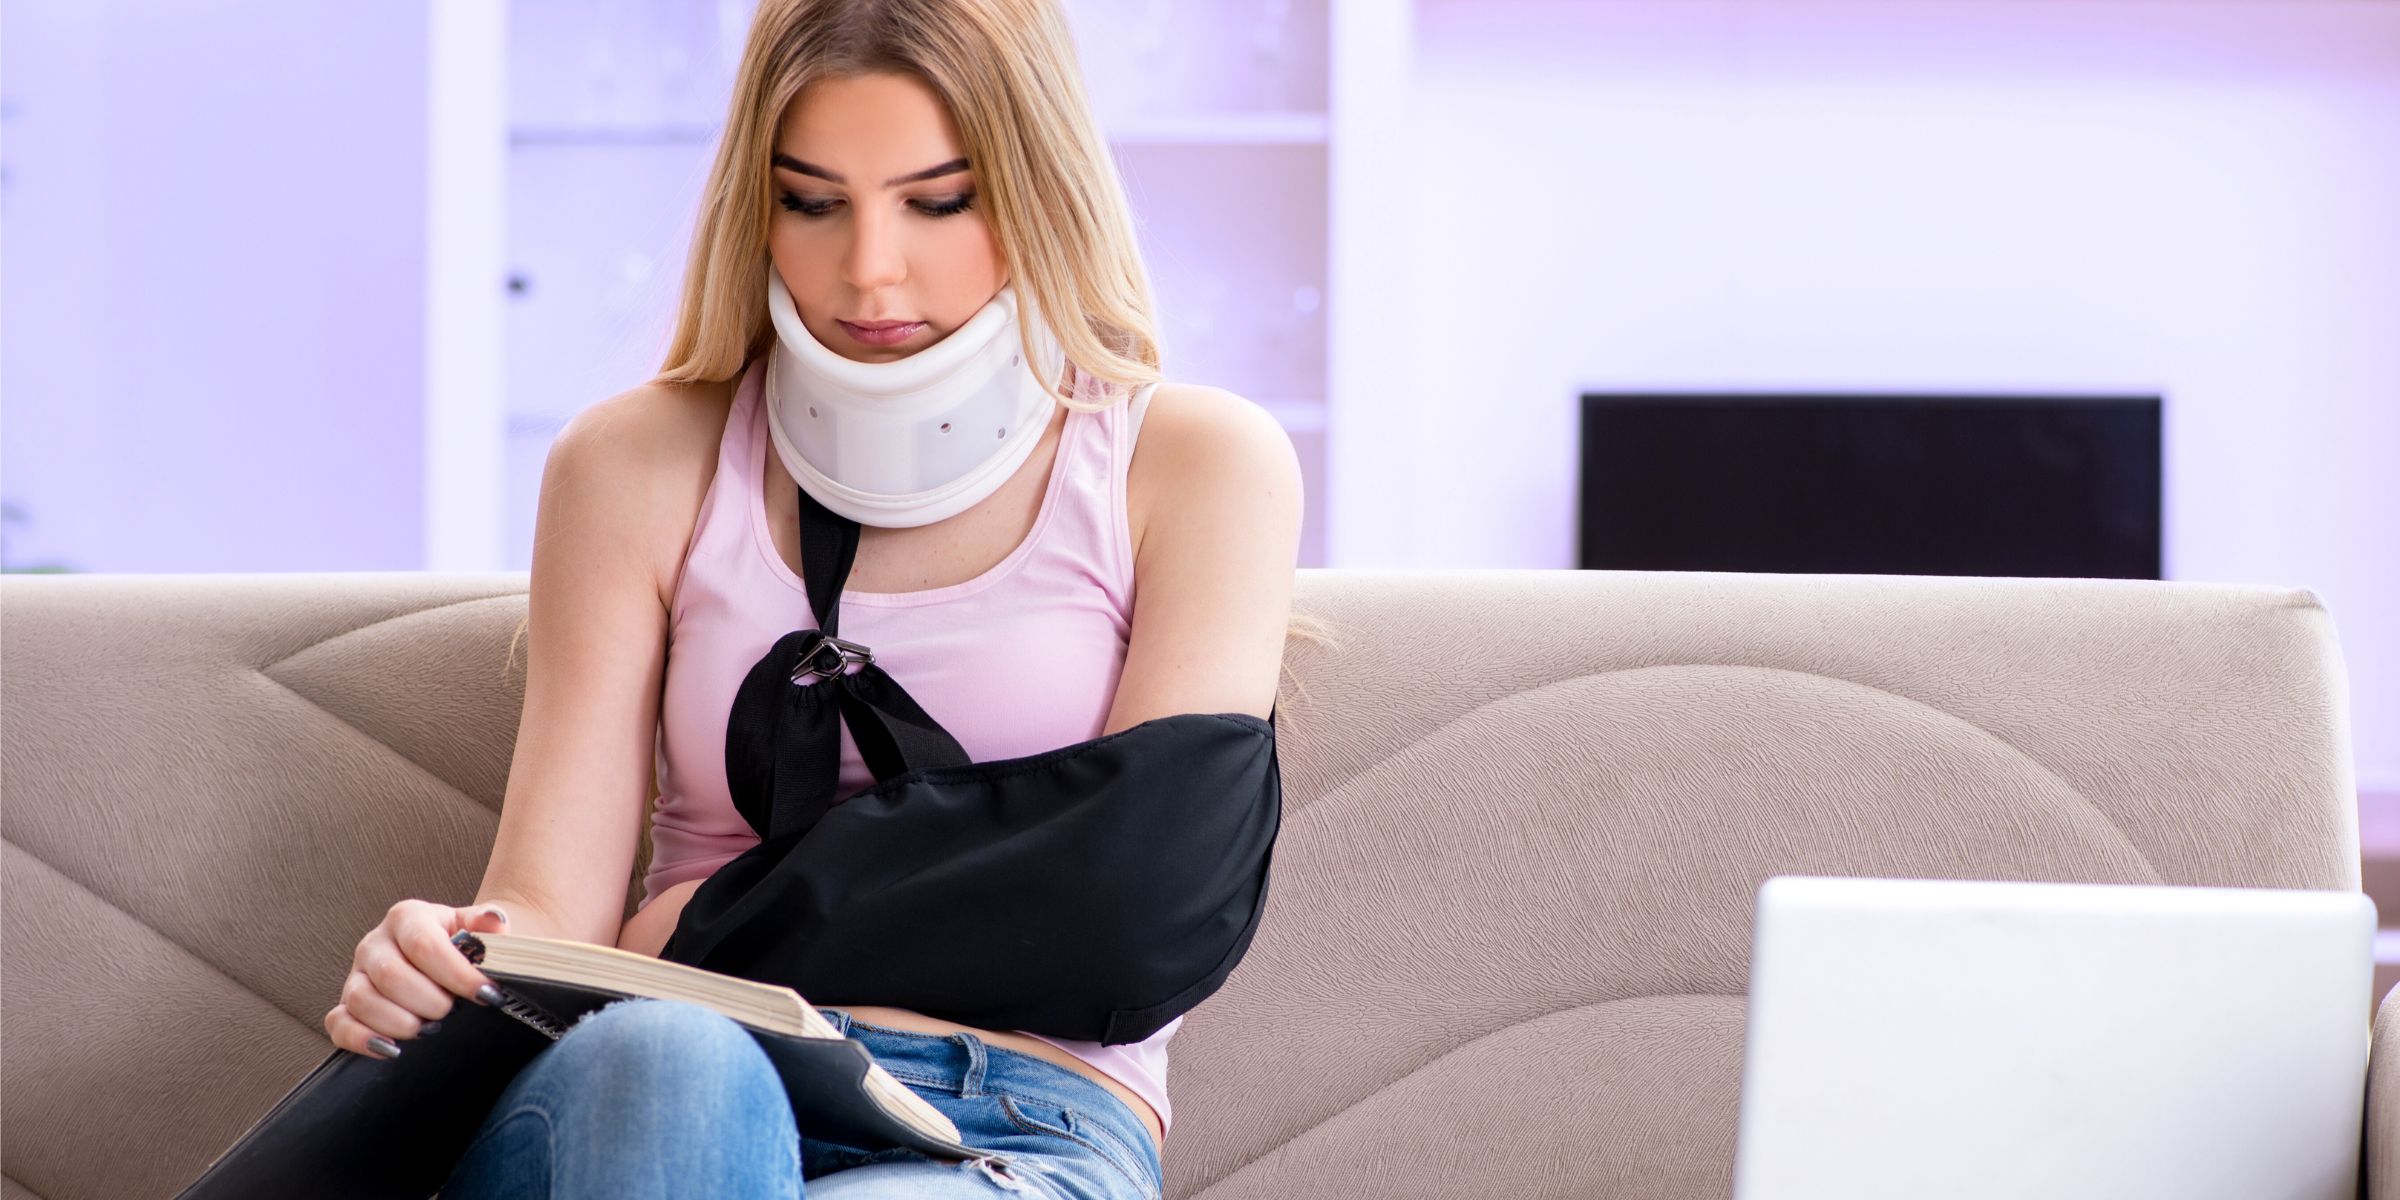 young woman in neck brace and arm cast injured recovering from car accident injury